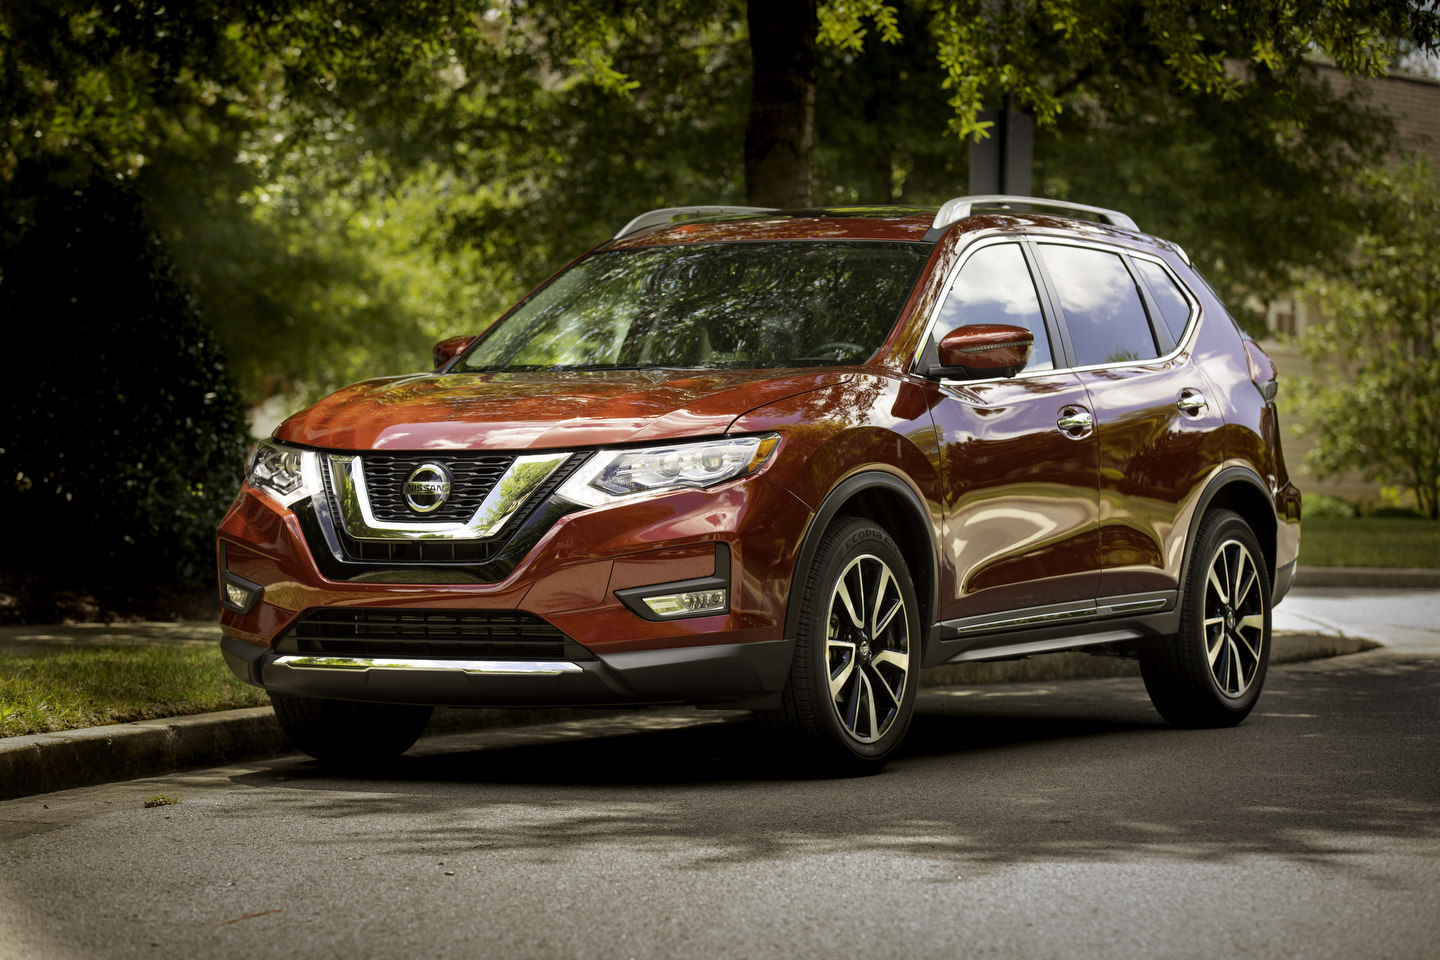 Three Reasons to Buy a Pre-Owned Nissan Rogue